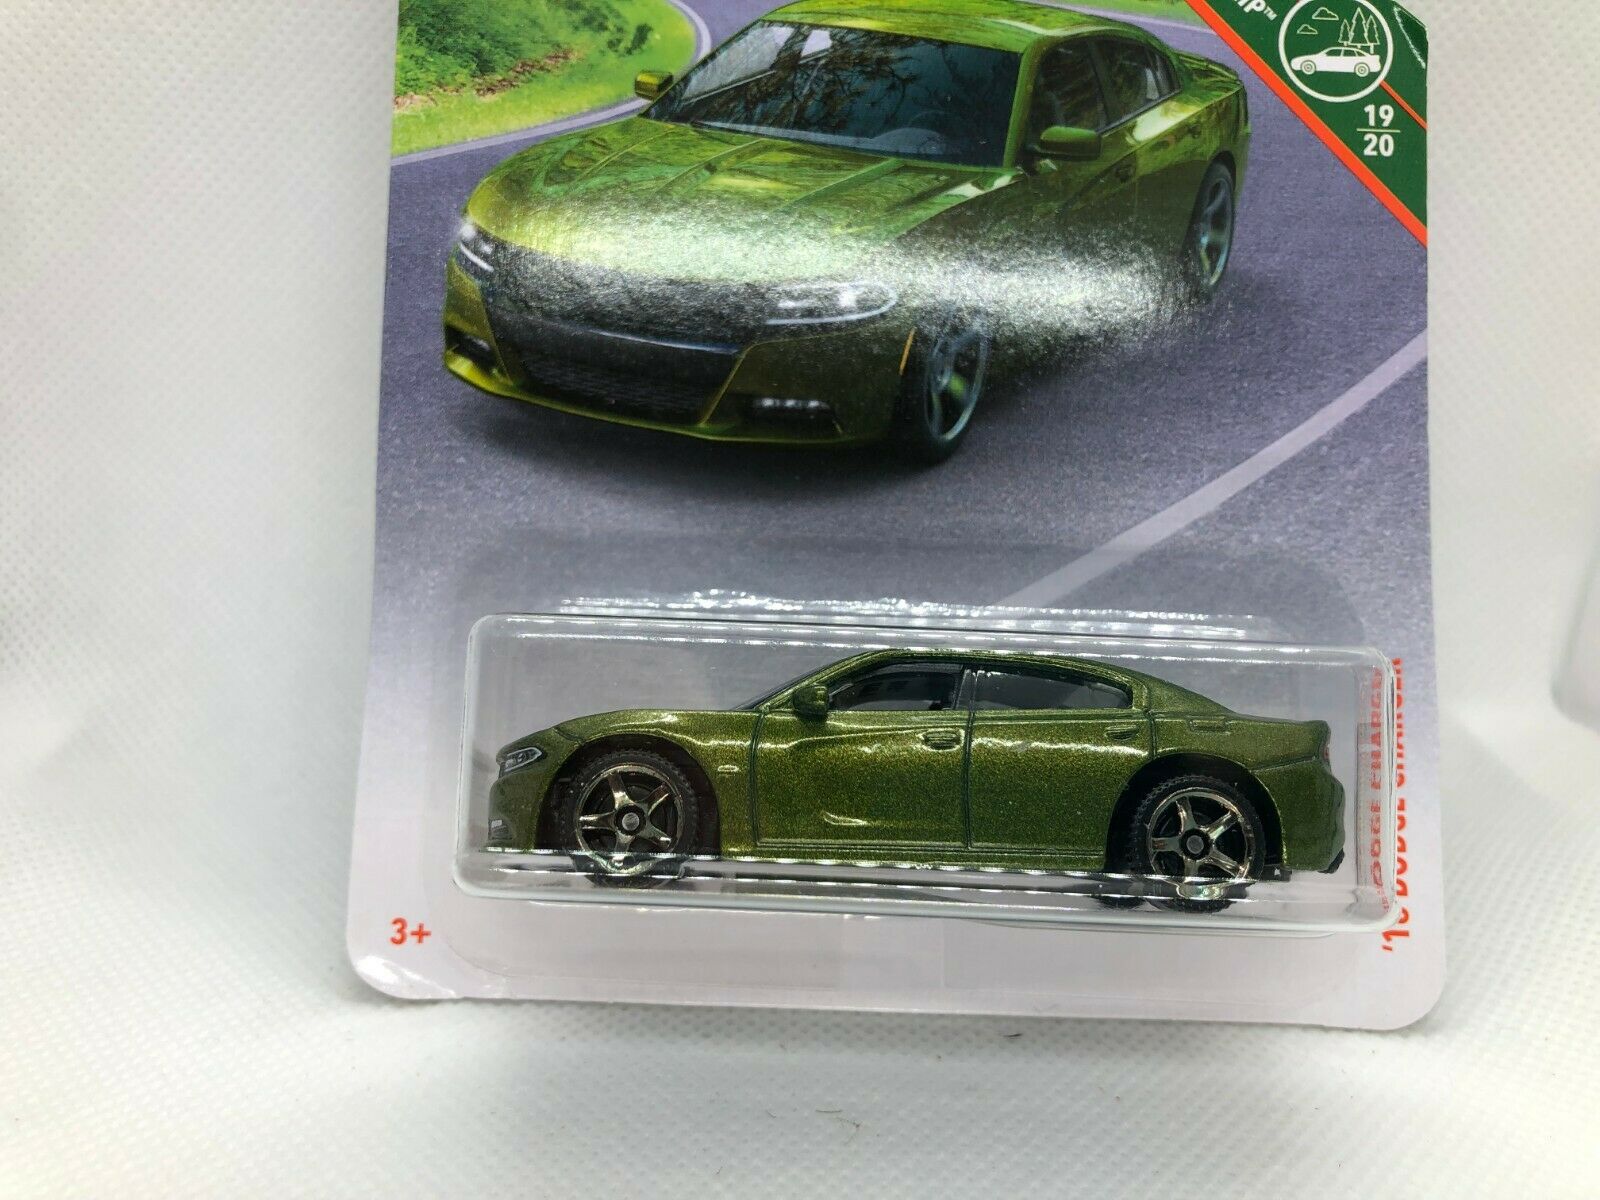 '18 Dodge Charger Hot Wheels